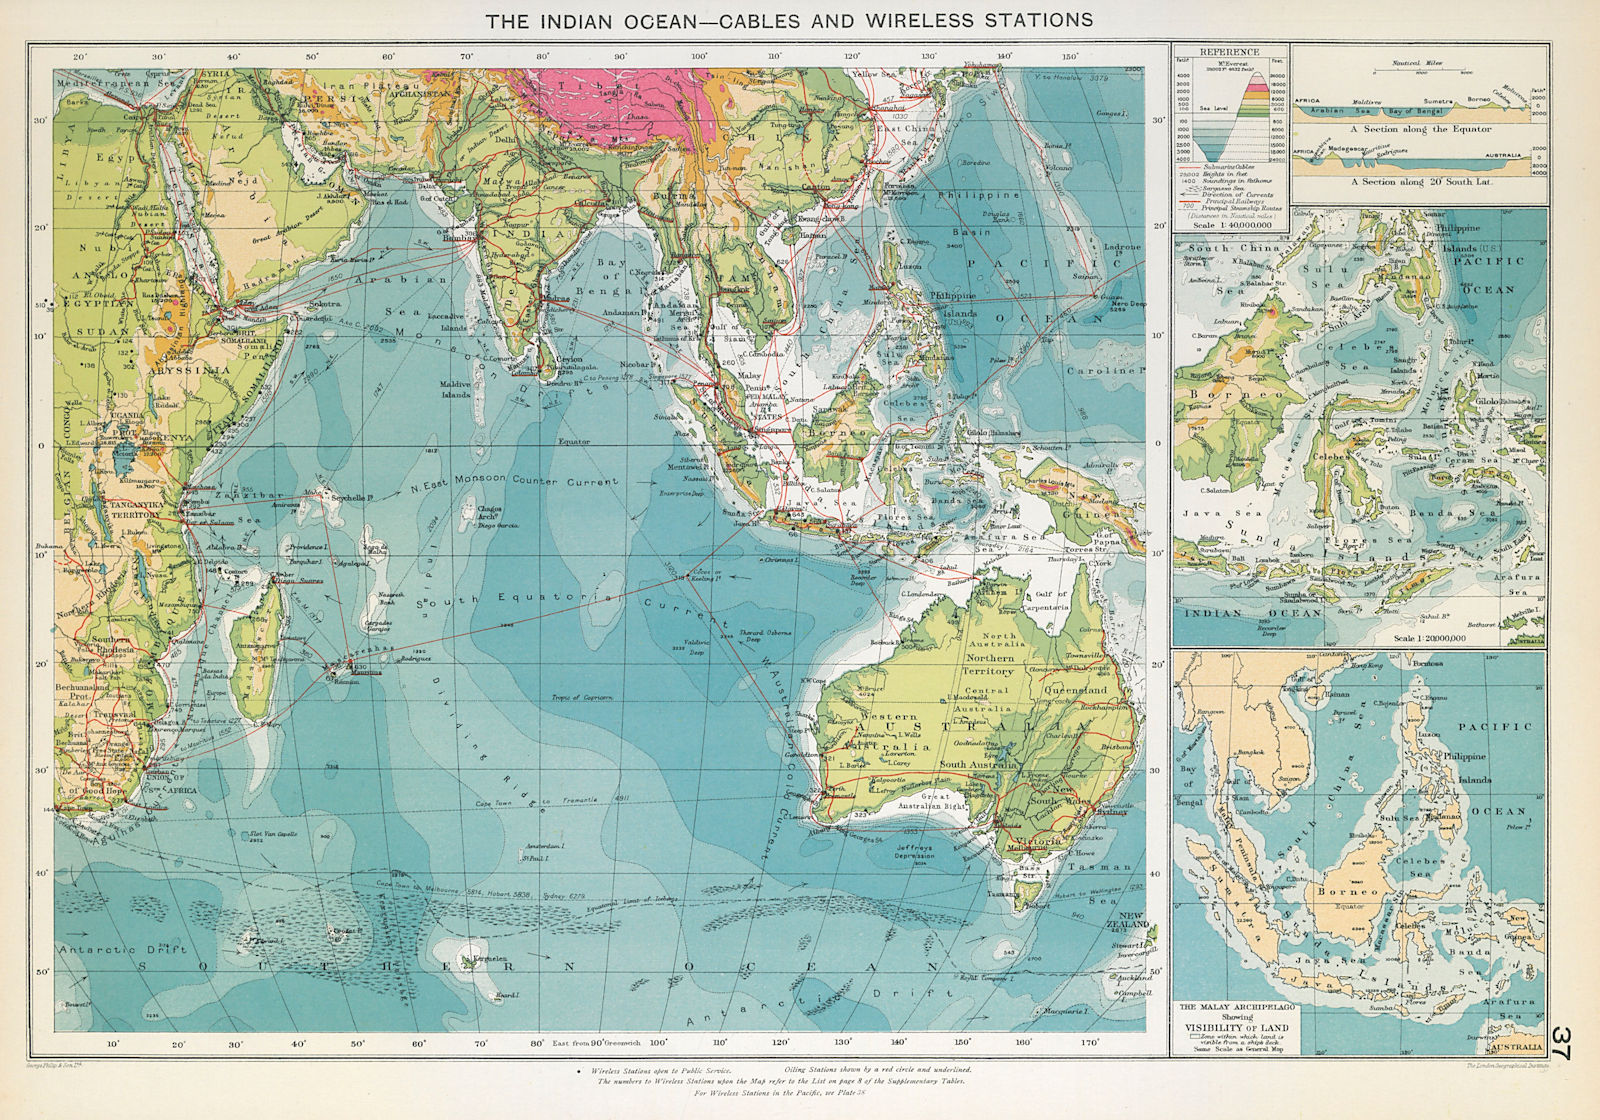 Indian Ocean. Cables Wireless Stations. Land visibility. Shipping lines 1927 map